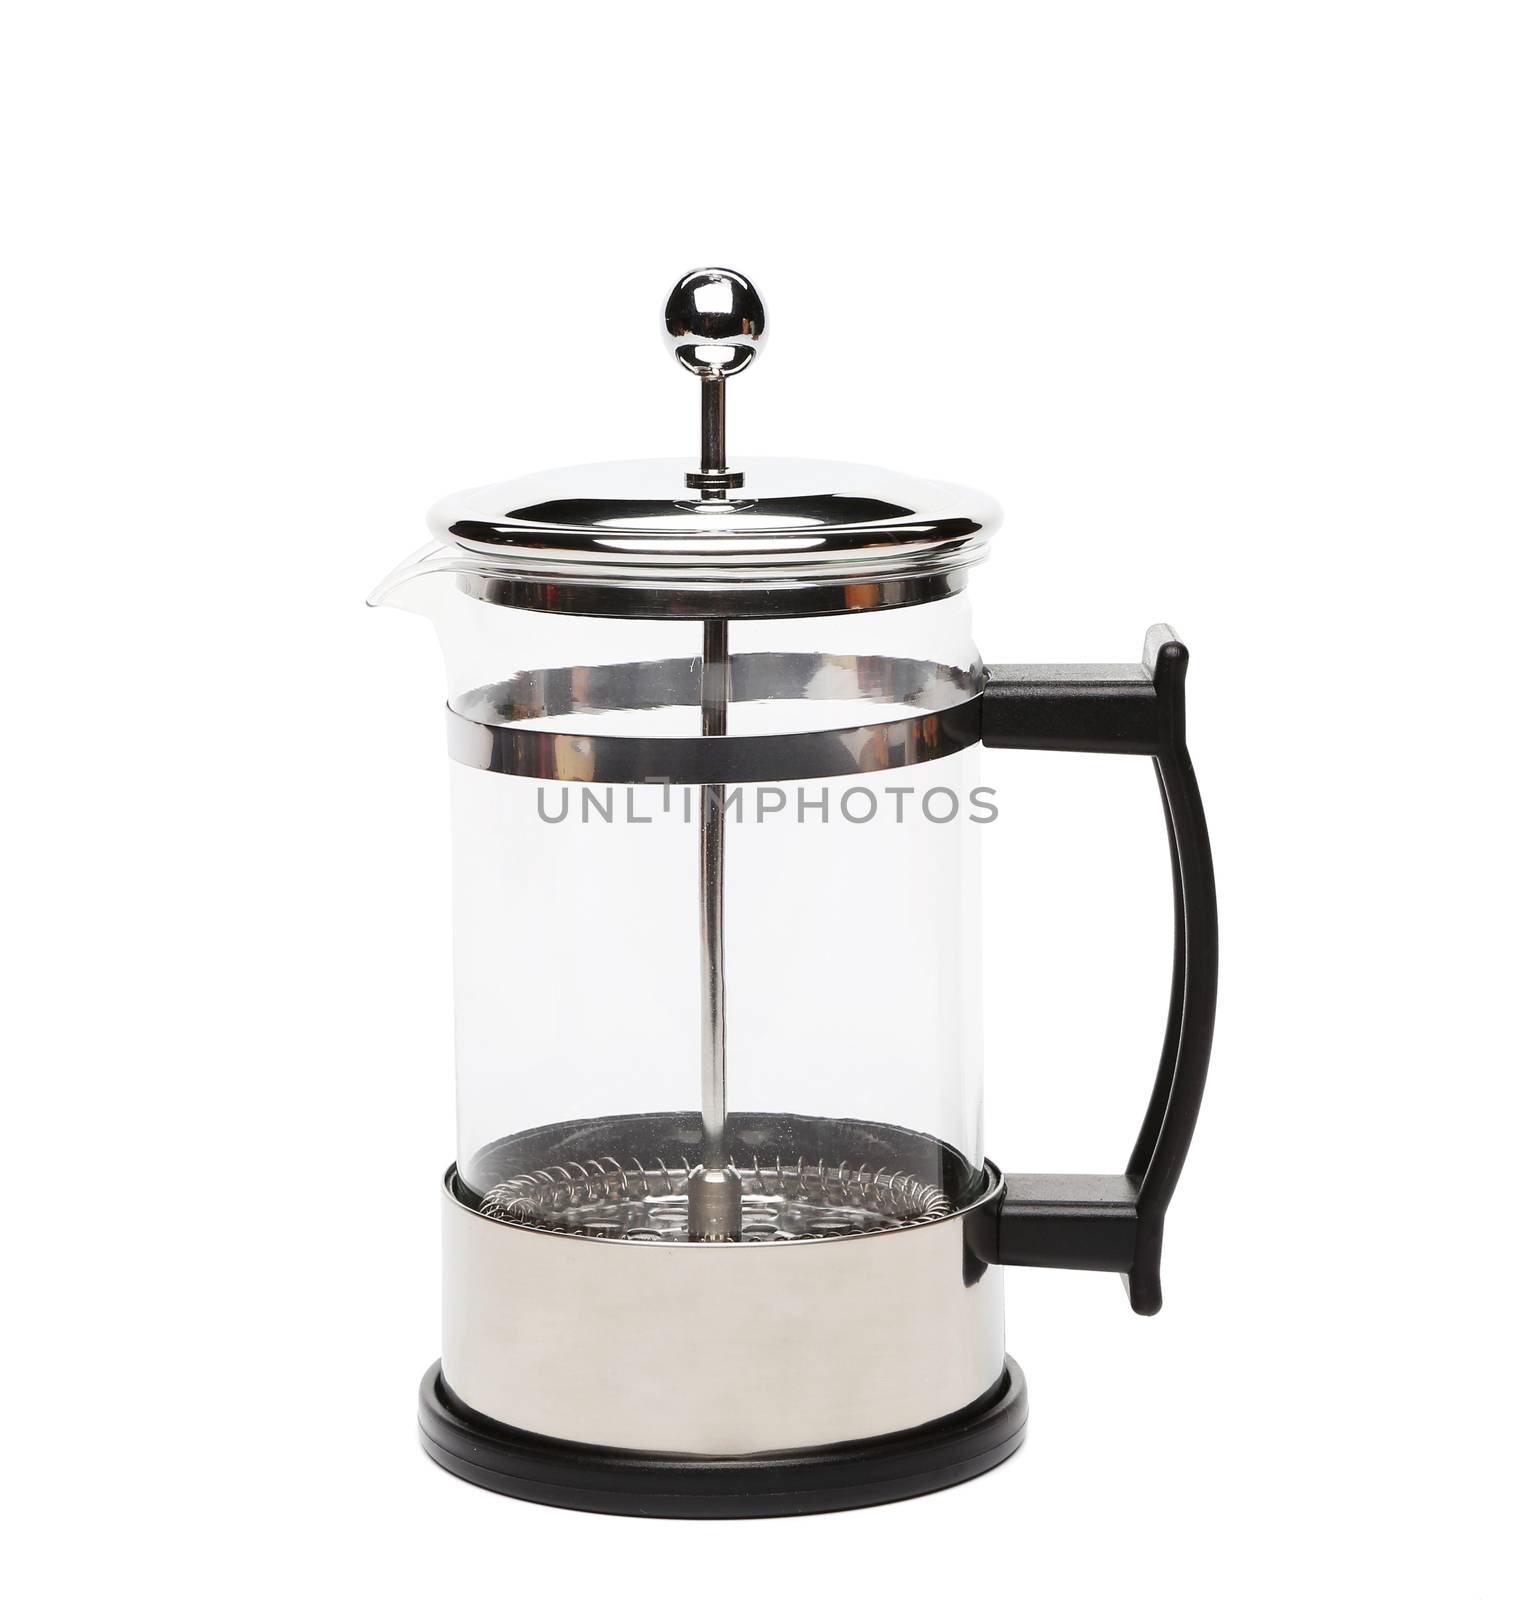 French Press Coffee or Teapot by indigolotos